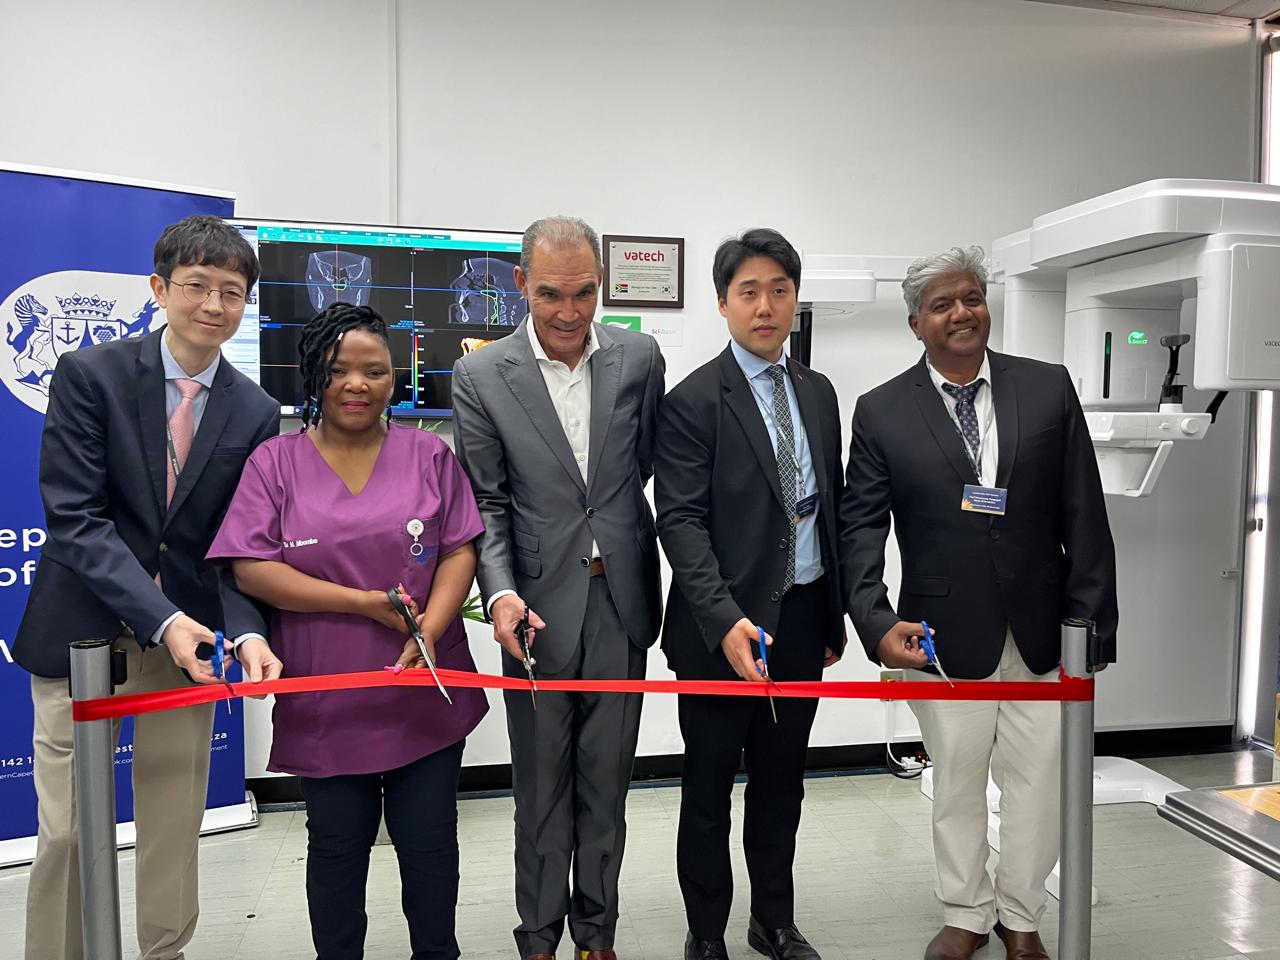 Ribbon cutting ceremony of the new CBCT at the Tygerberg Oral Health Centre / UWC School of Dentistry: Vatech UK Rep Eric Chang, Prof. Nomafrench Mbombo, Prof. Tyrone Pretorius, UWC Vice Chancellor and Rector Franc Chang, UWC Dean Prof. Veerasamy Yengopal